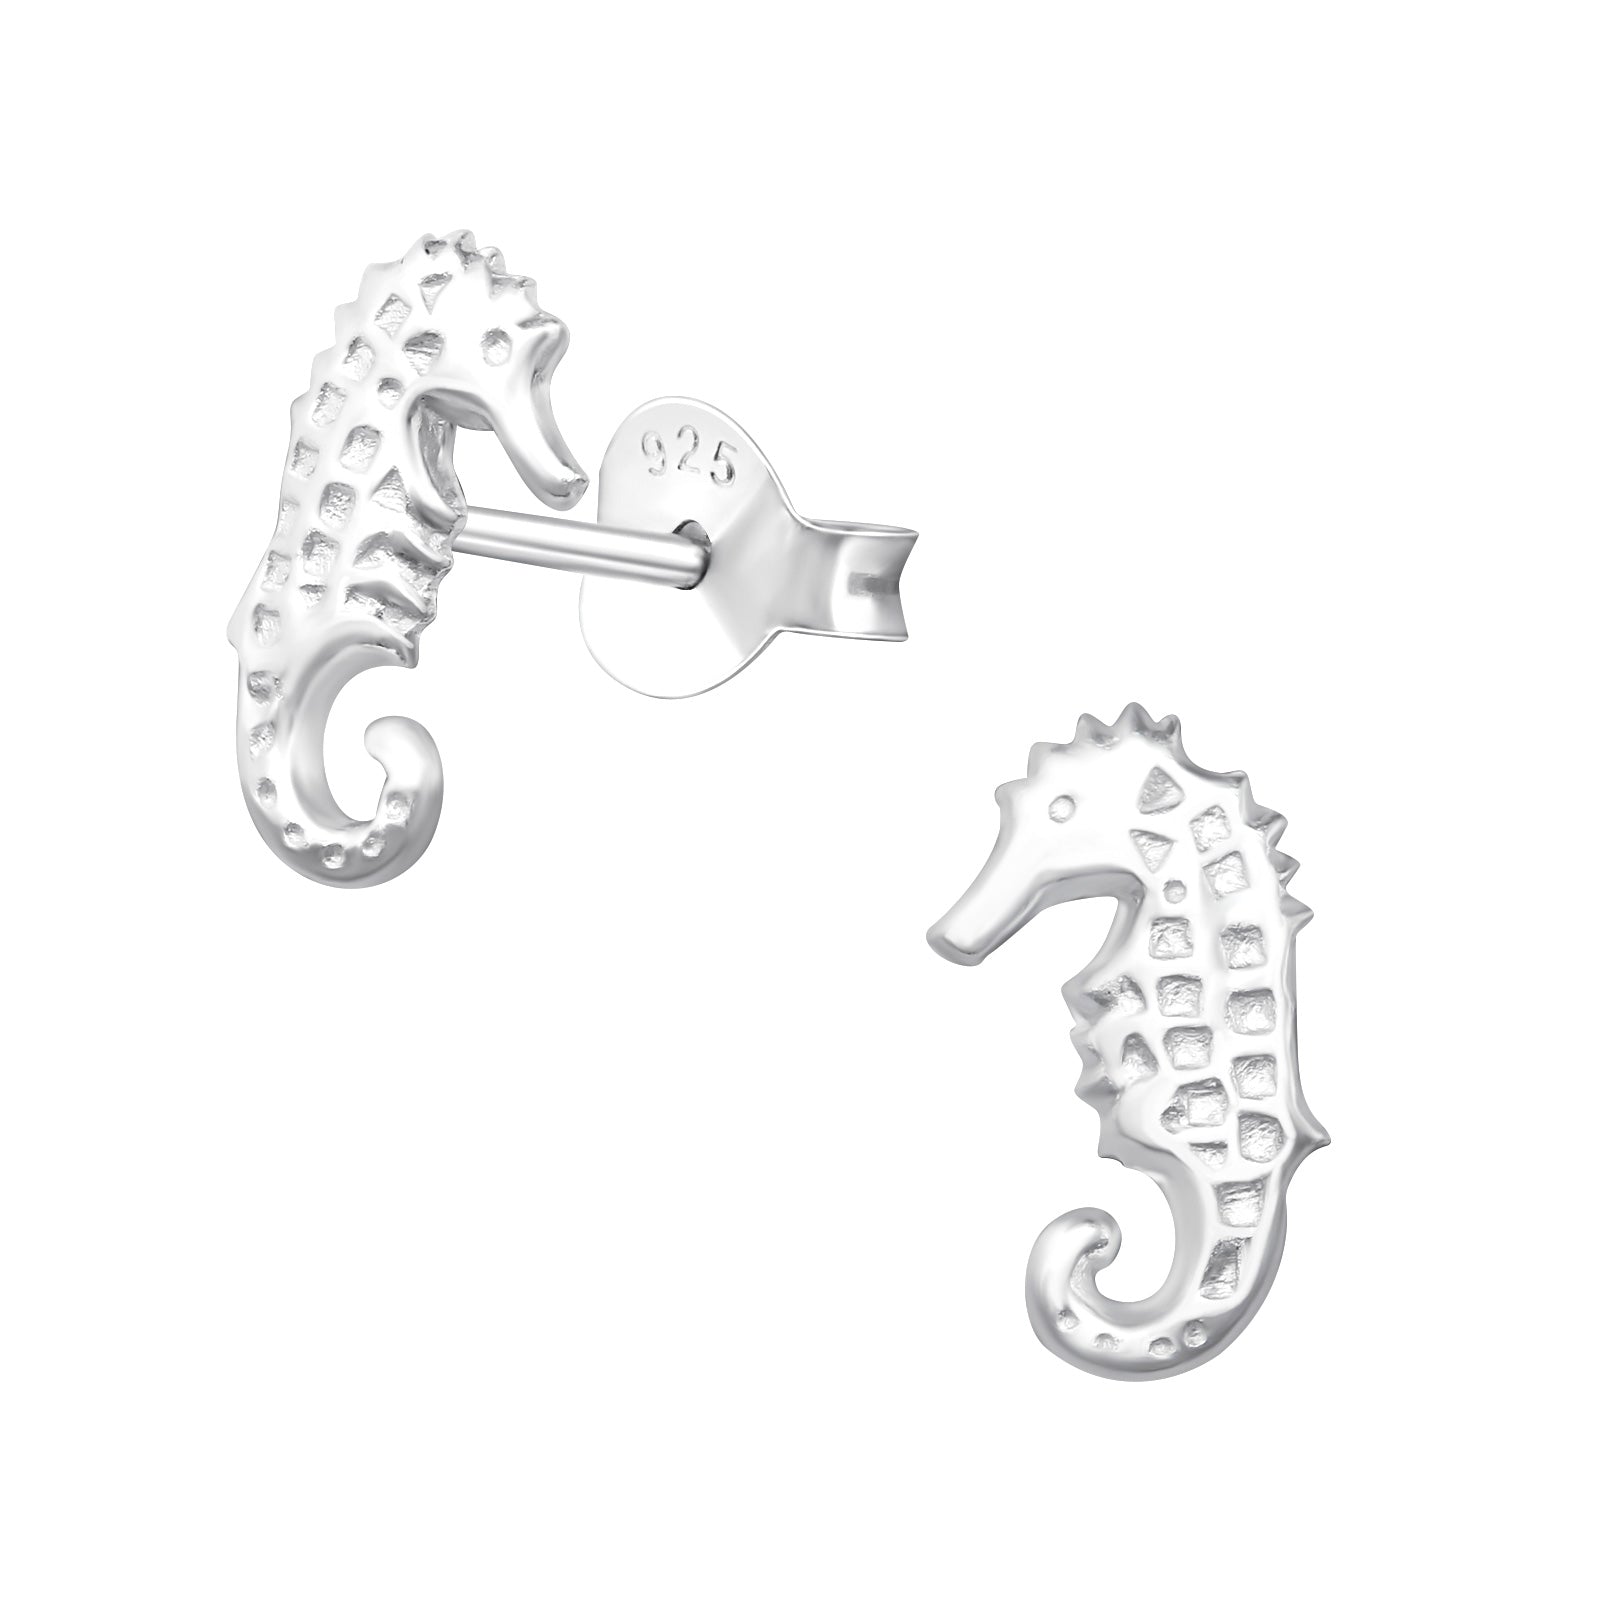 Explore oceans with these pretty seahorse stud earrings.